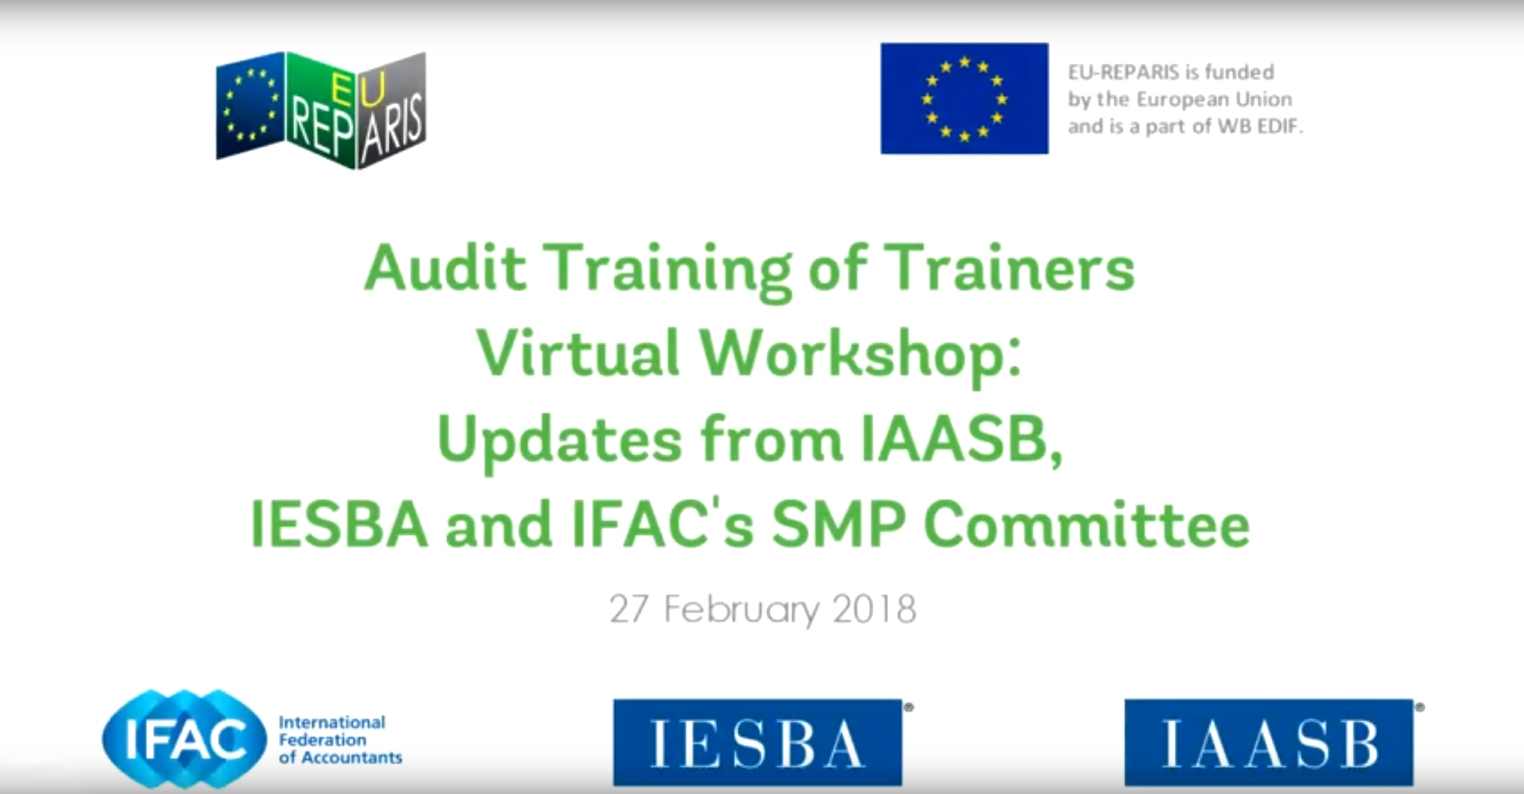 Audit Training of Trainers' Virtual Workshop: Updates from IAASB, IESBA and IFAC’s SMP Committee